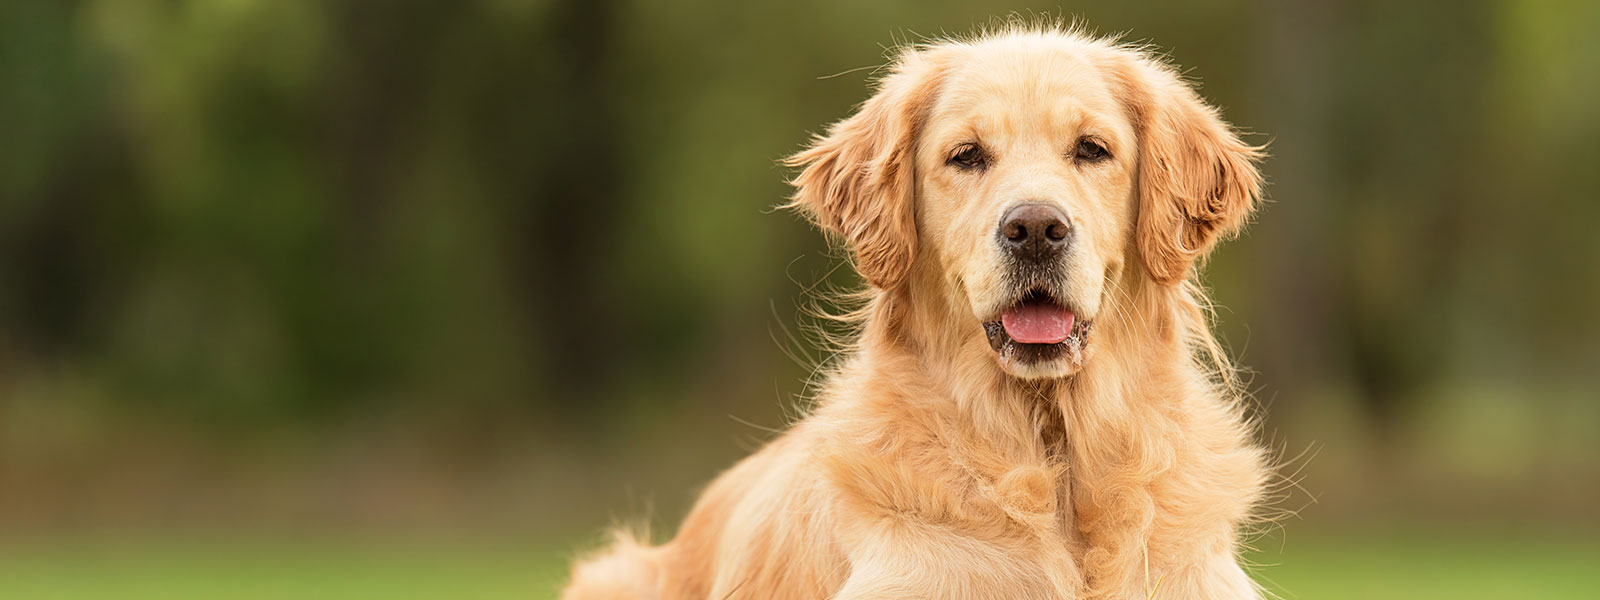 How to Keep a Golden Retriever’s Joints Healthy